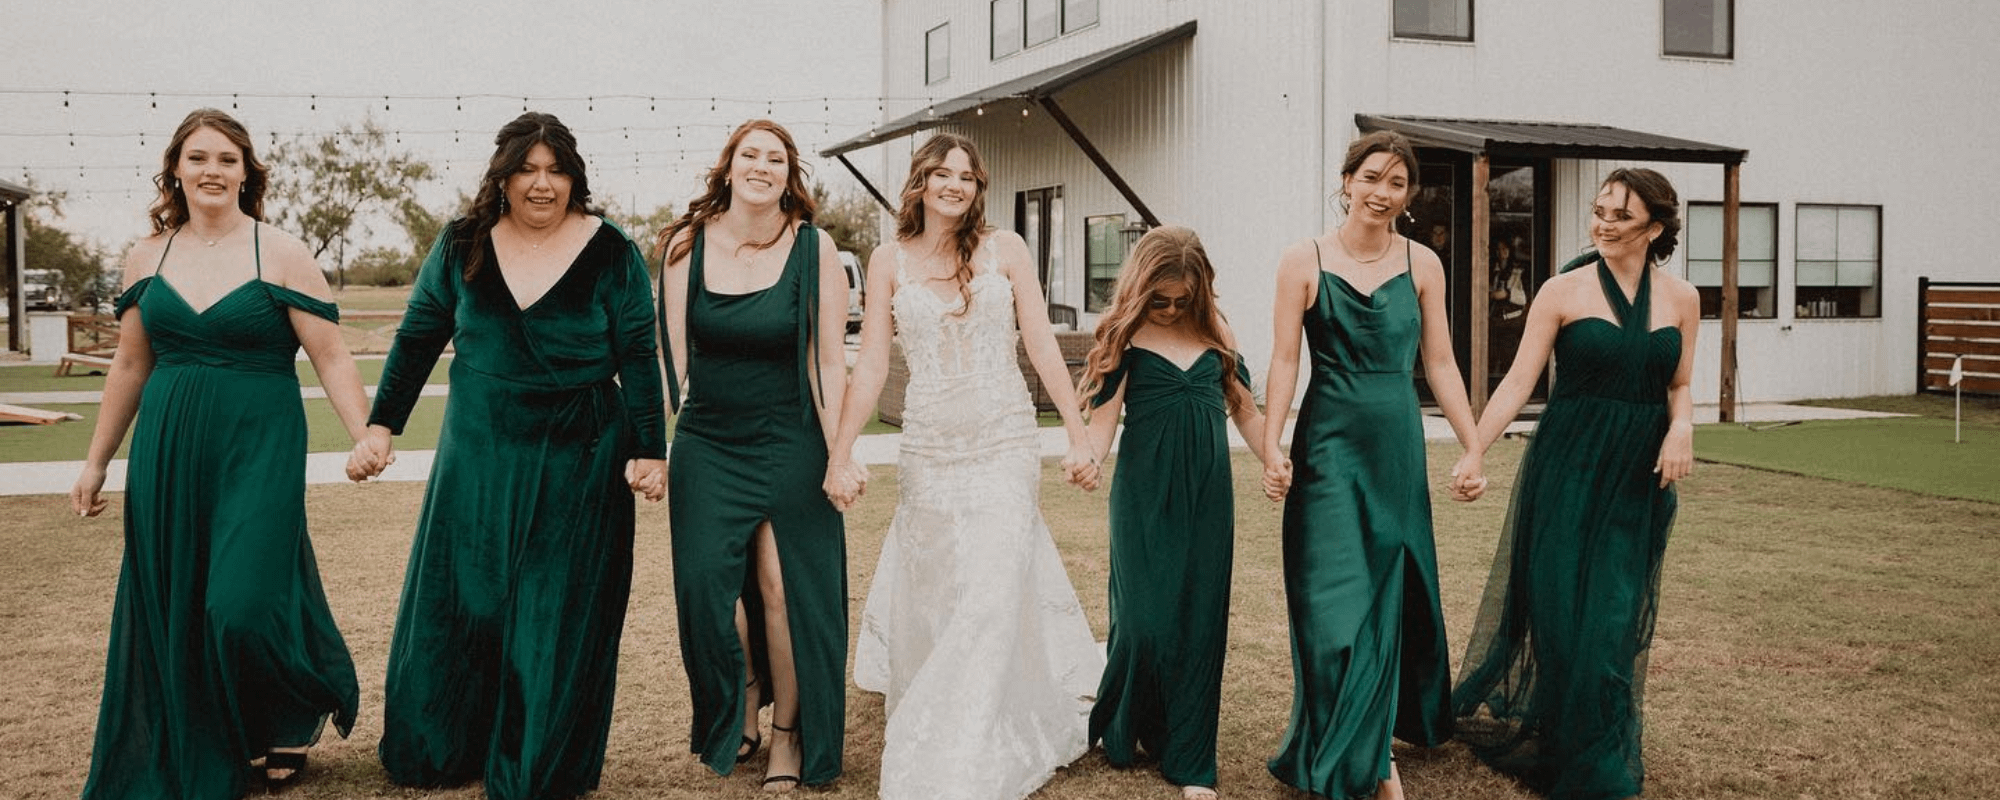 bridal party holding hands standing outside of wedding venue 